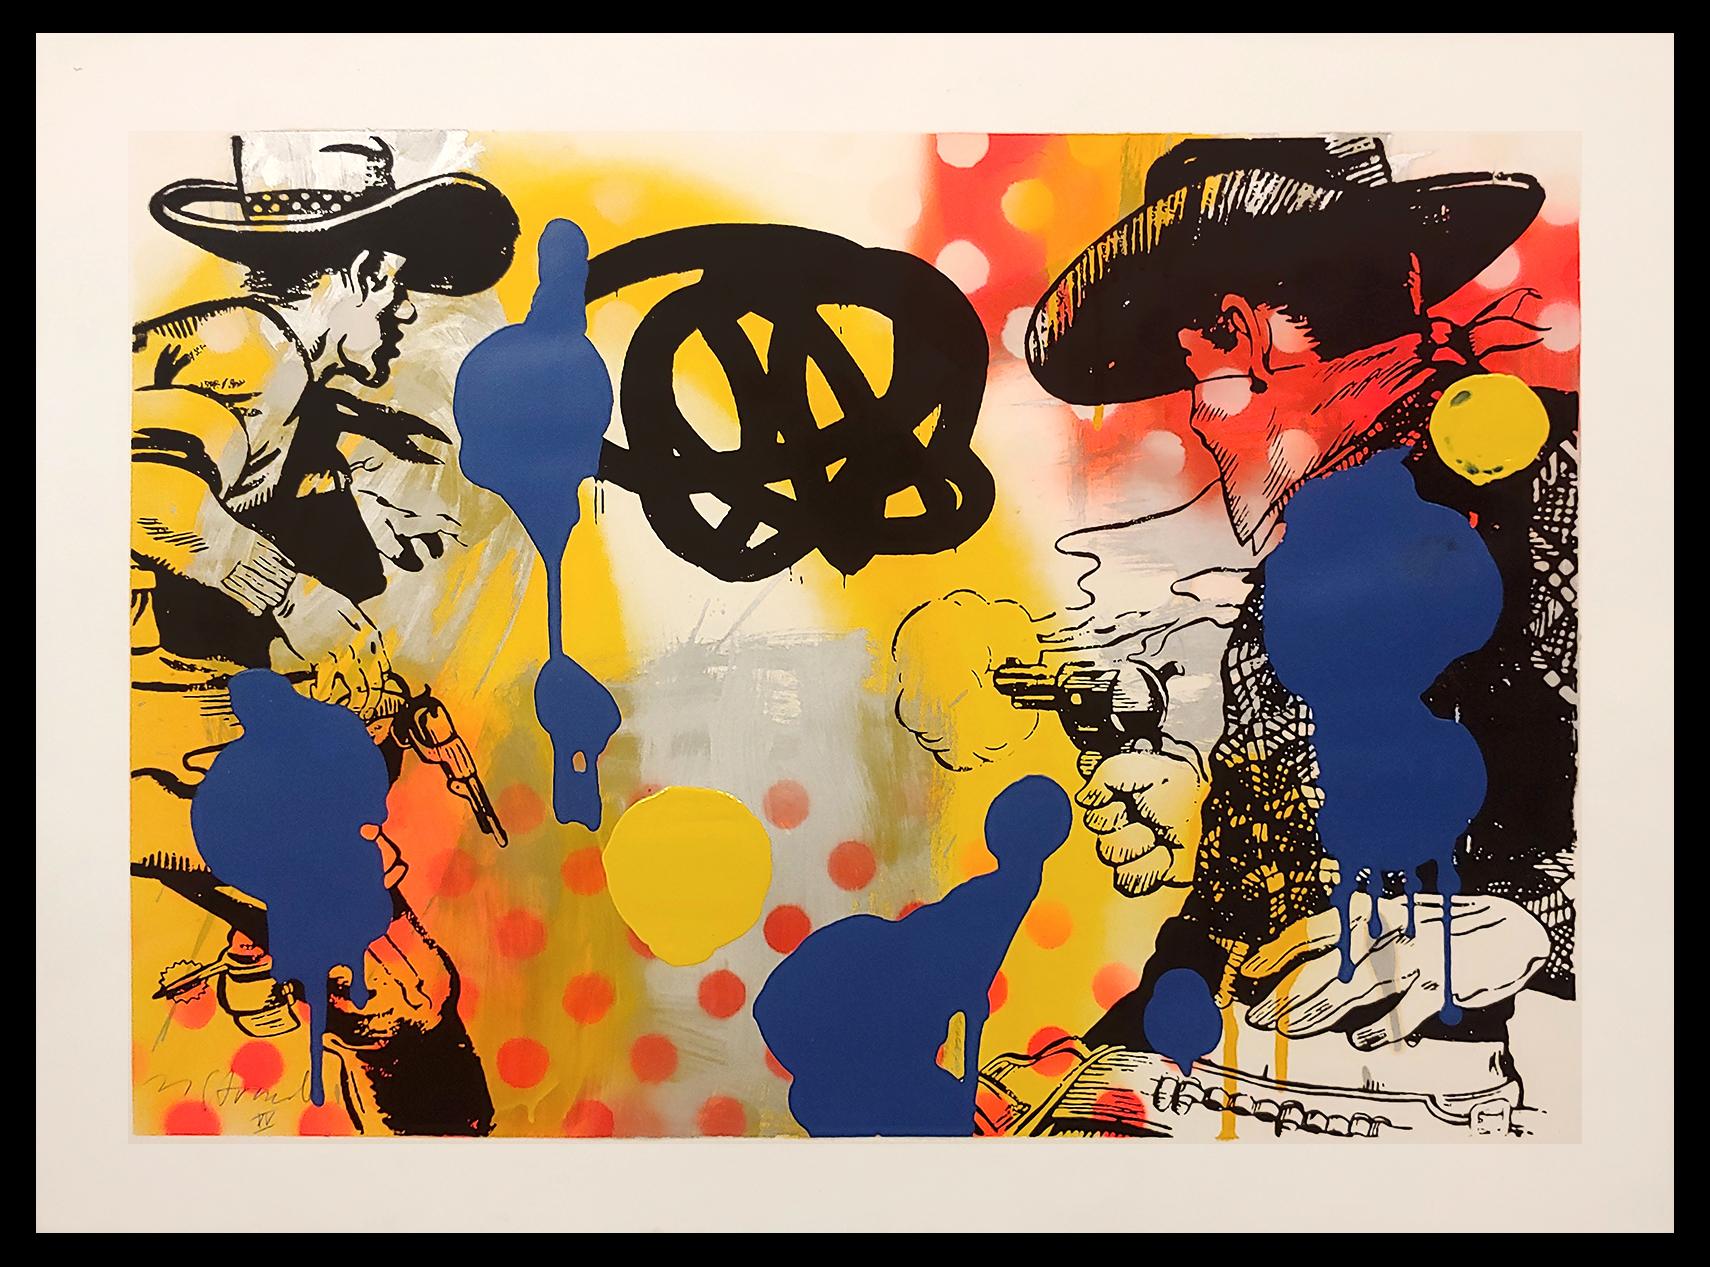 "The Past is Not The Past" #4 Mixed Media Acrylic & Spray paint with Silkscreen - Painting by Matt Straub